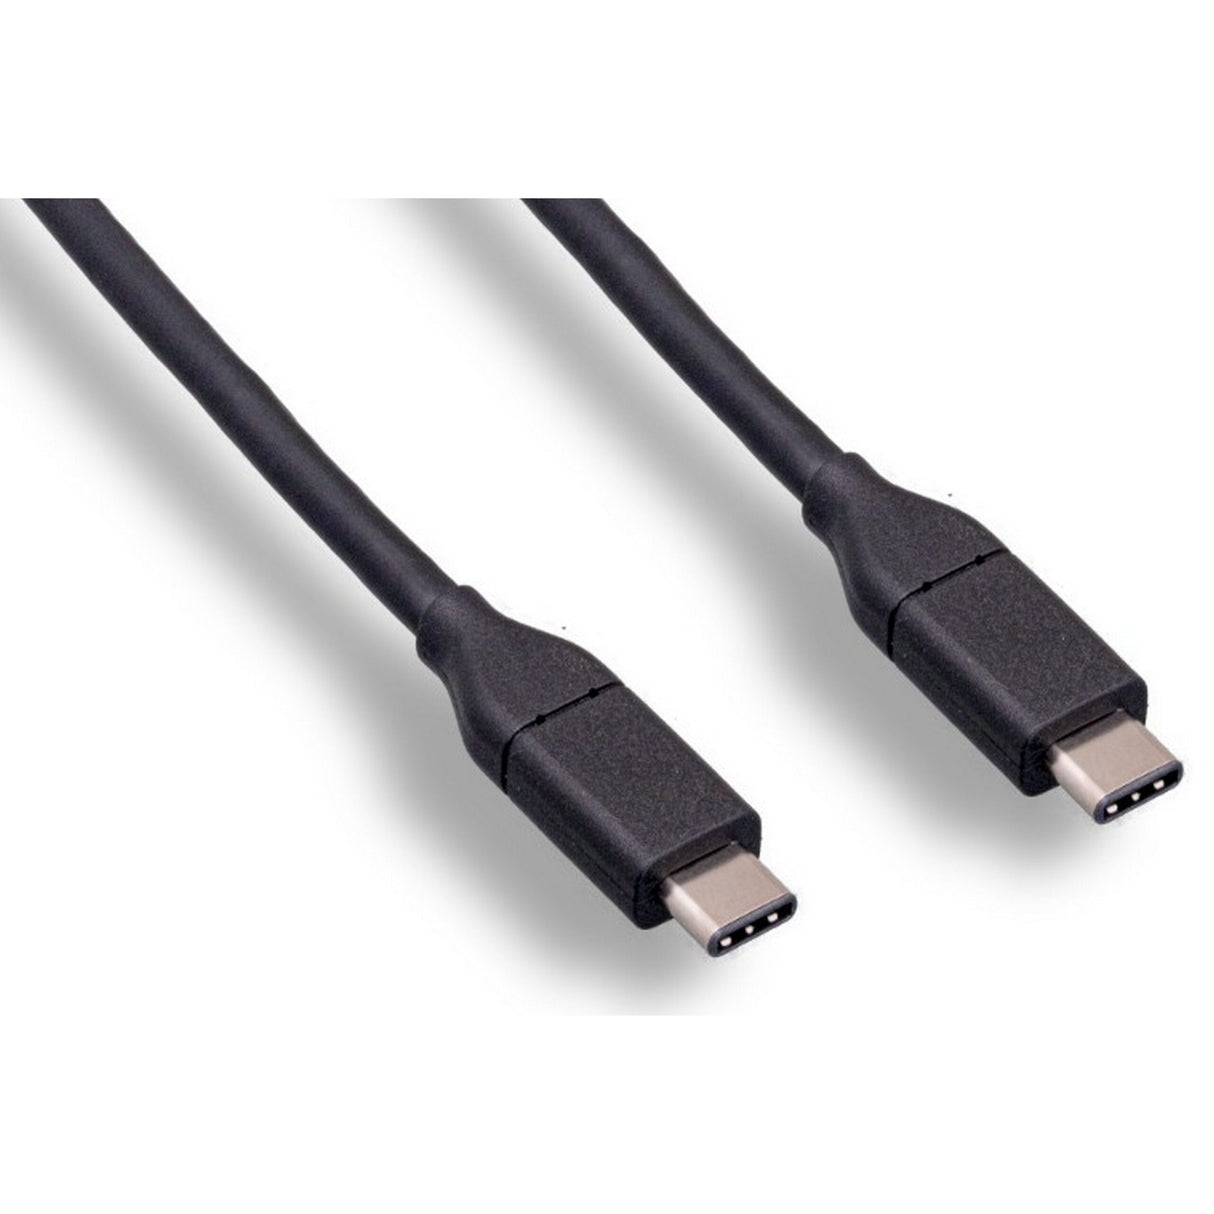 Liberty E-USB3.1CC-1M USB 3.1 C to C Pre-Made Cable, 1 Meter